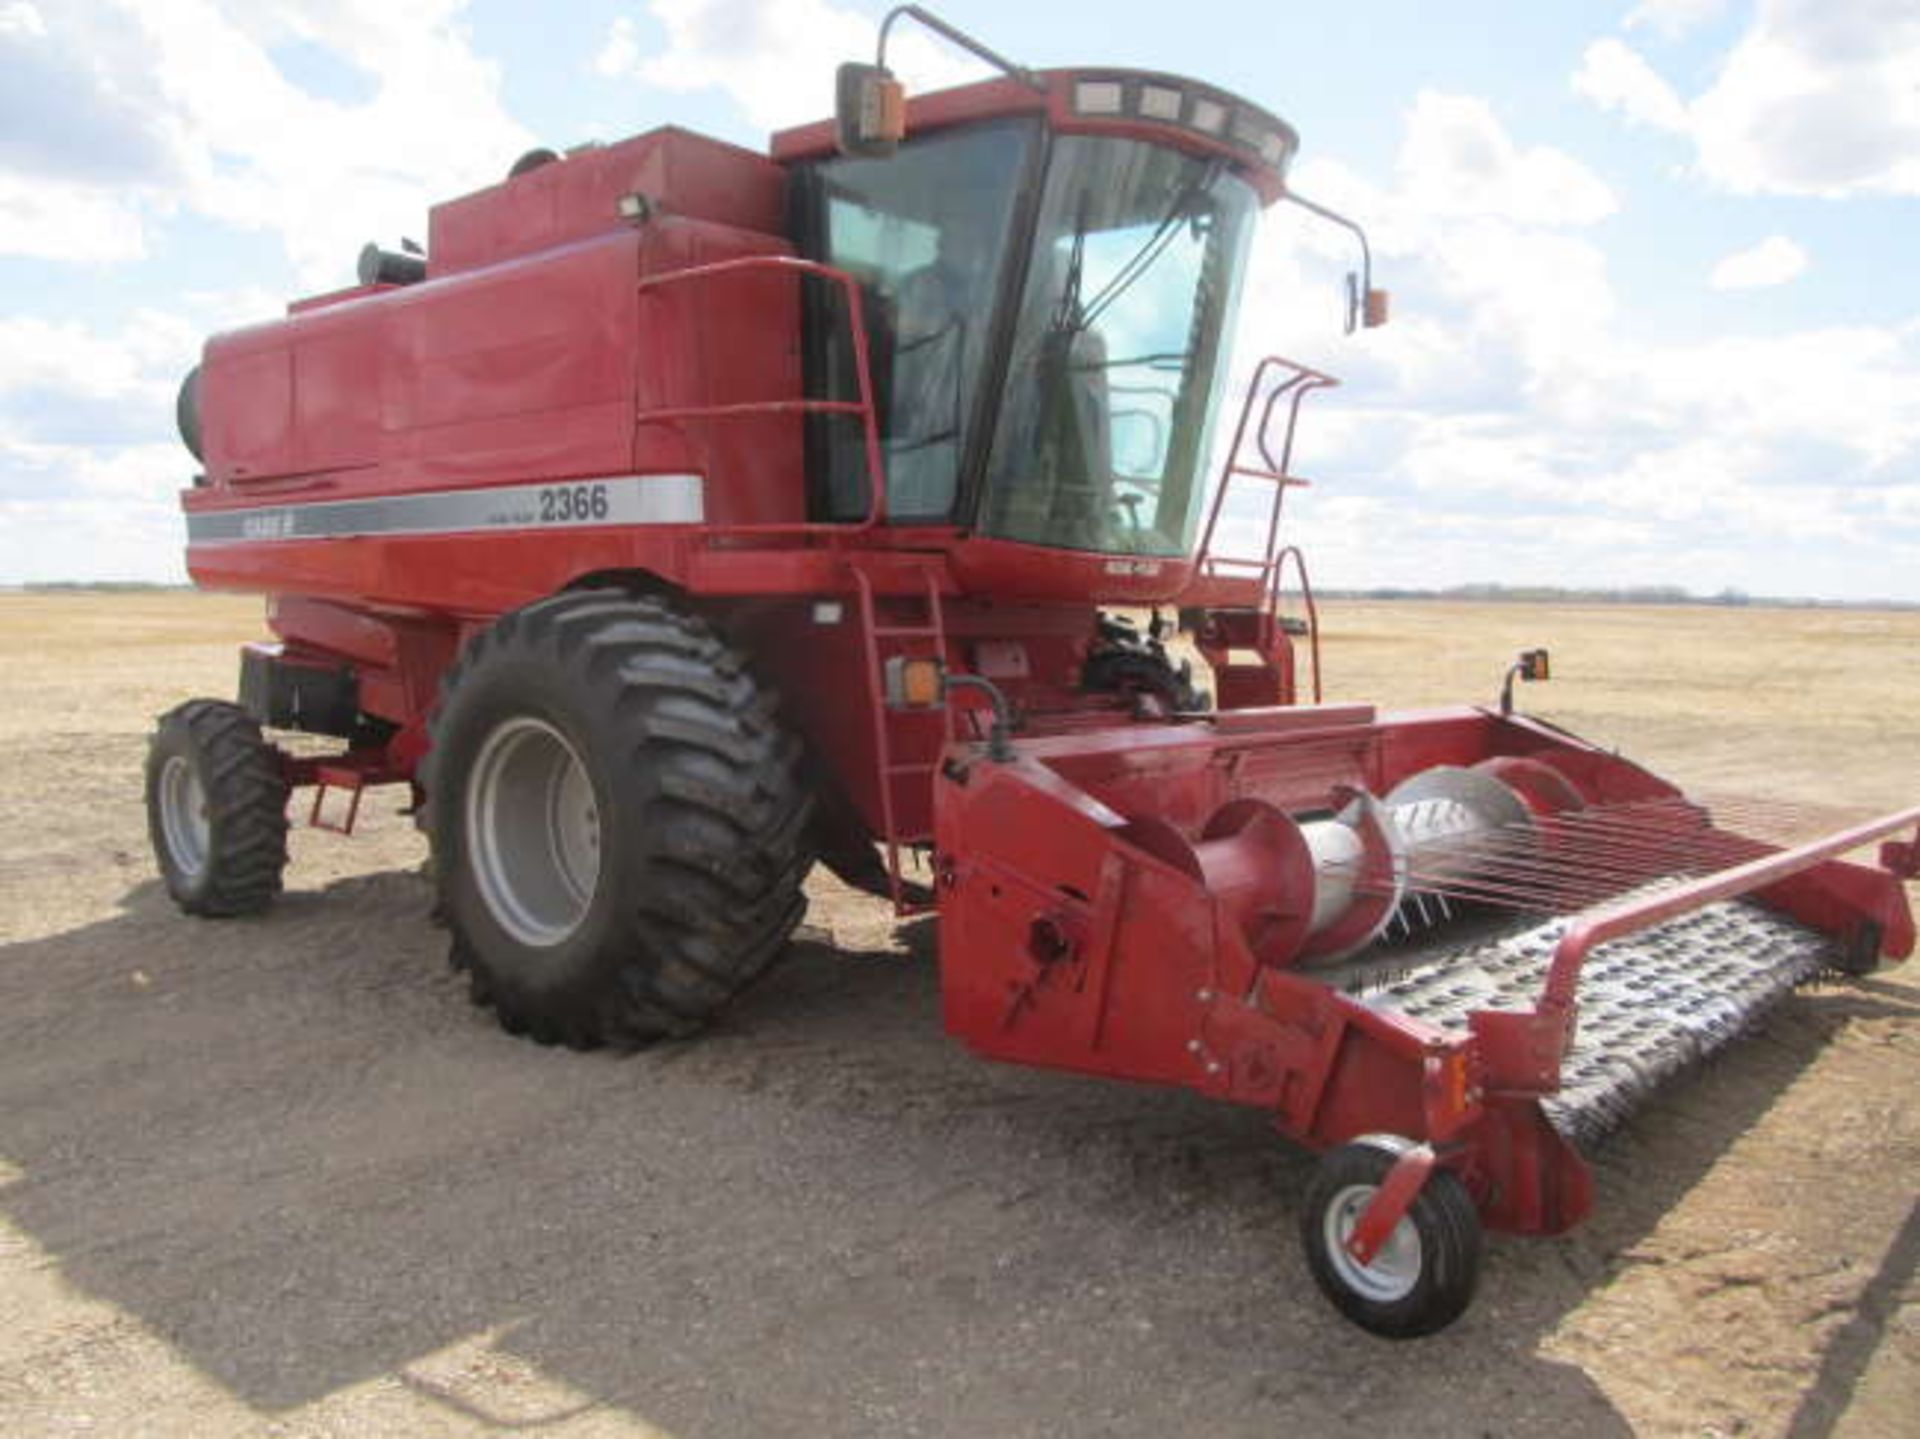 CASE IH 2366 AXIAL FLOW SP COMBINE; 987/1286 Rotor/Engine Hours, Case IH 1015 Pick-up Header, SN- - Image 5 of 5